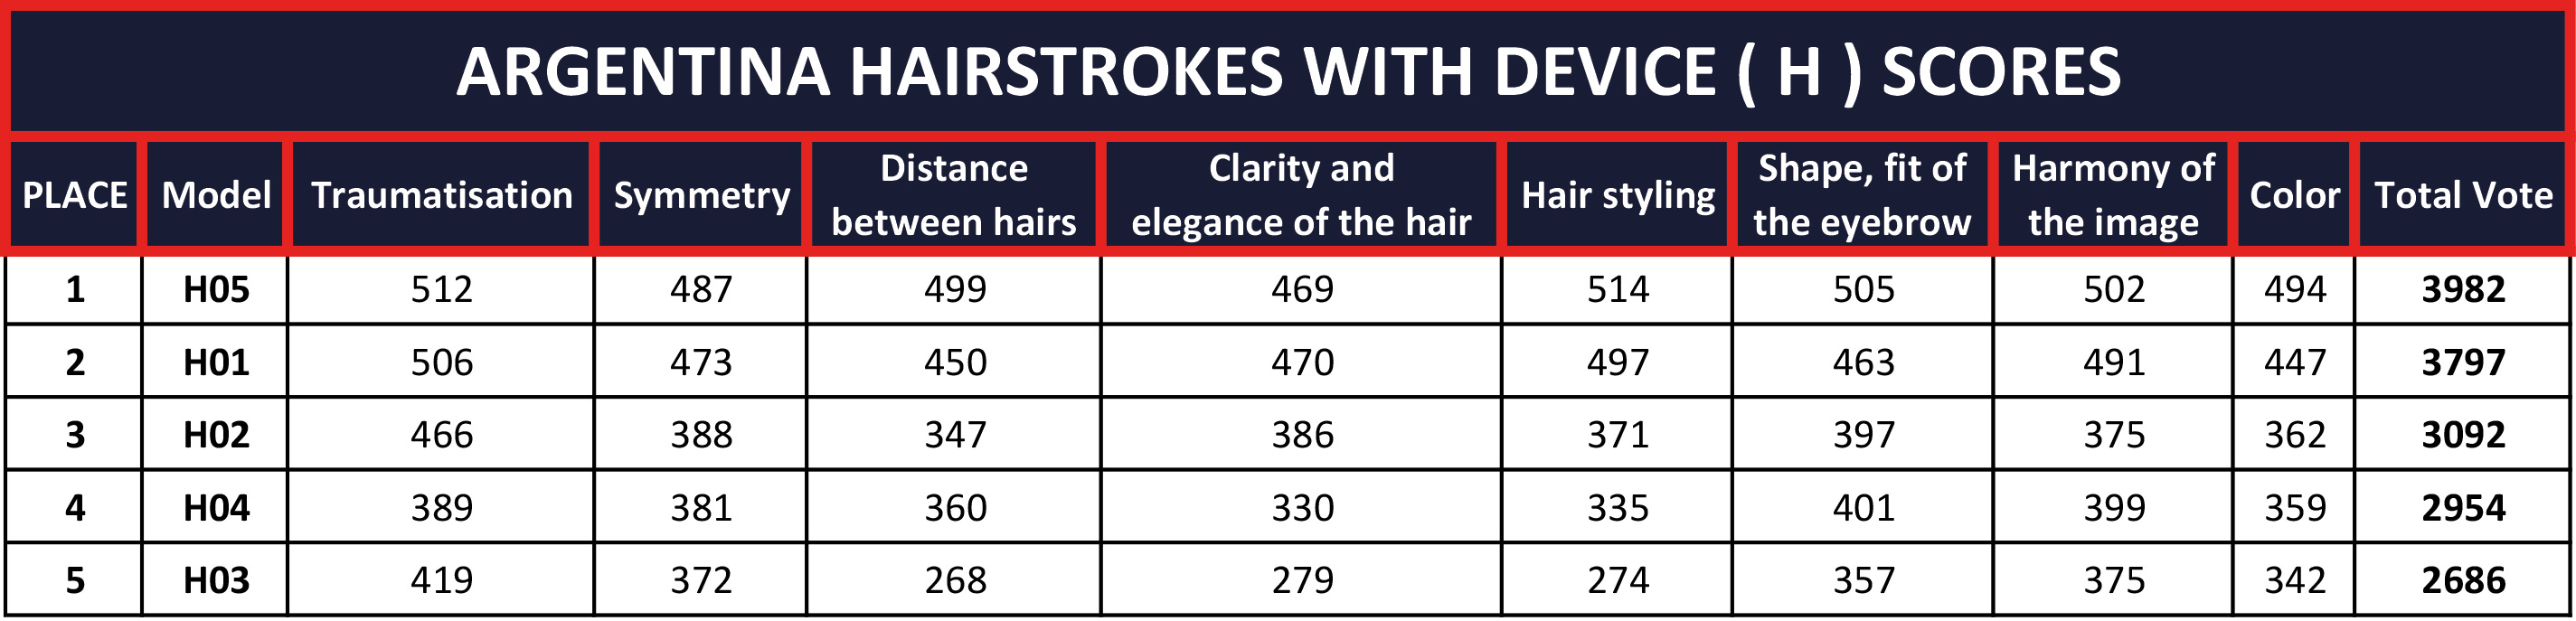 ARGENTINA-HAIRSTROKES-WITH-DEVICE-(-H-)-SCORES